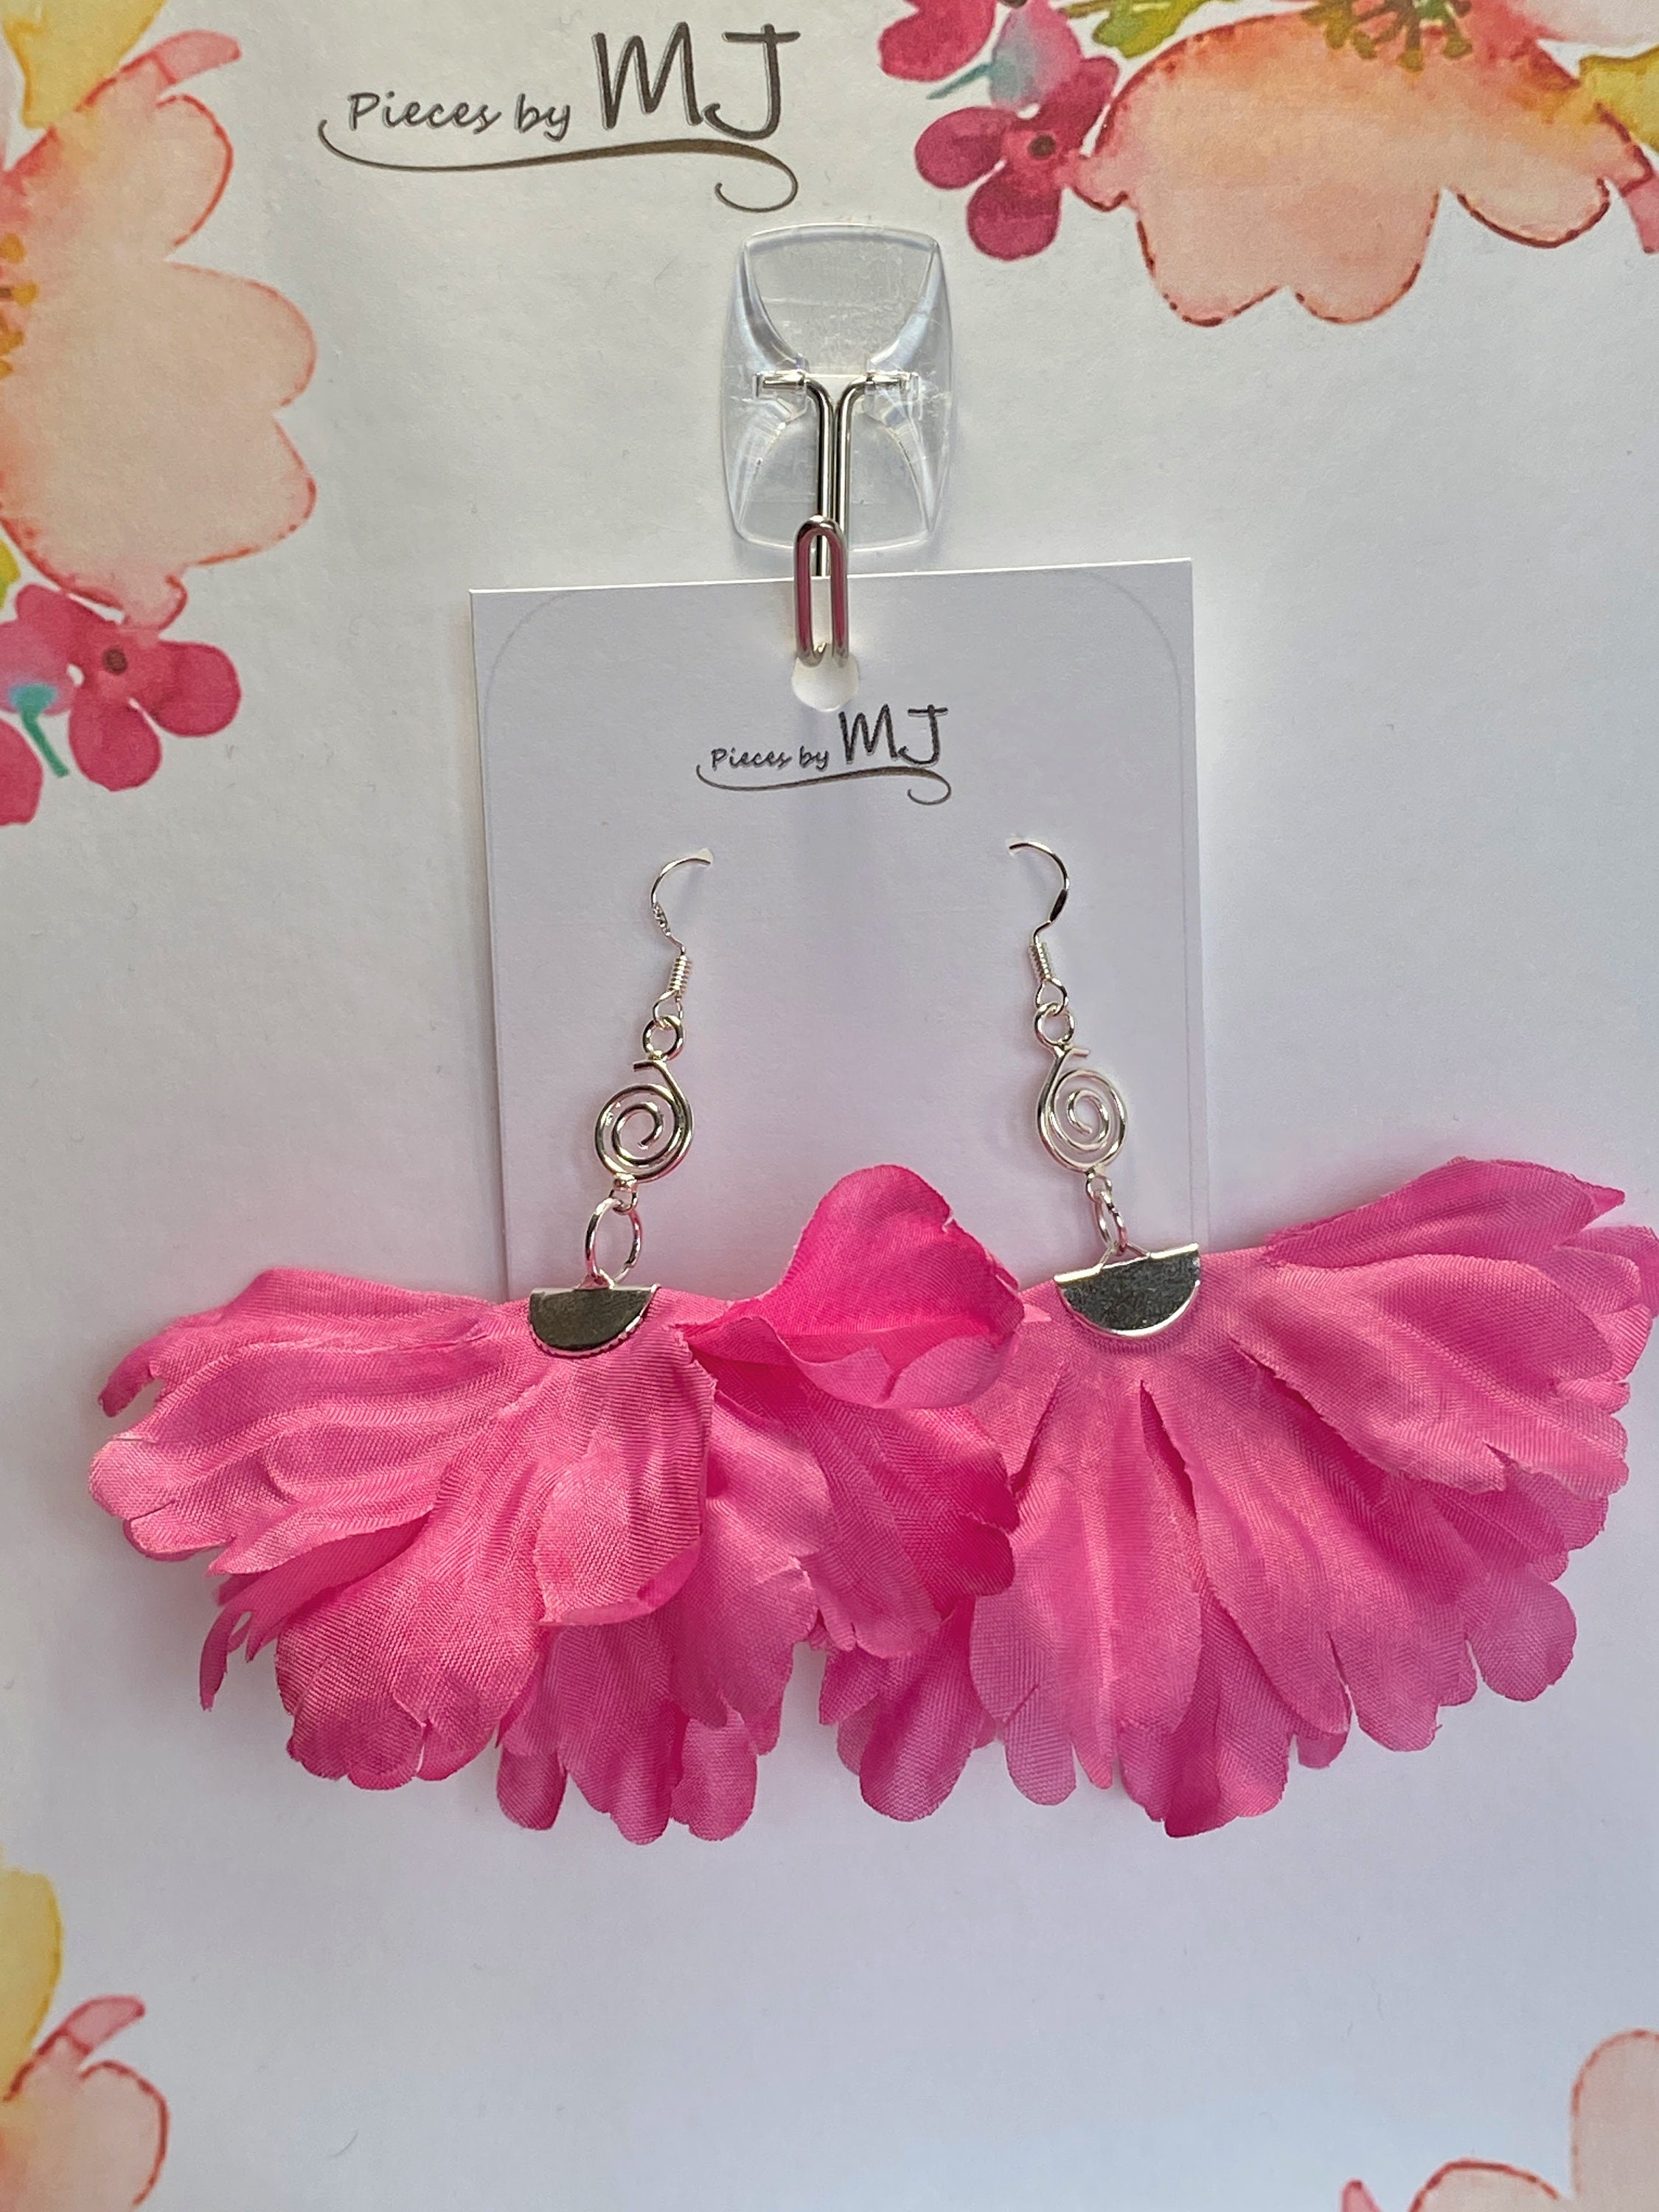 Your choice of pink orange yellow flower petals dangle | Etsy